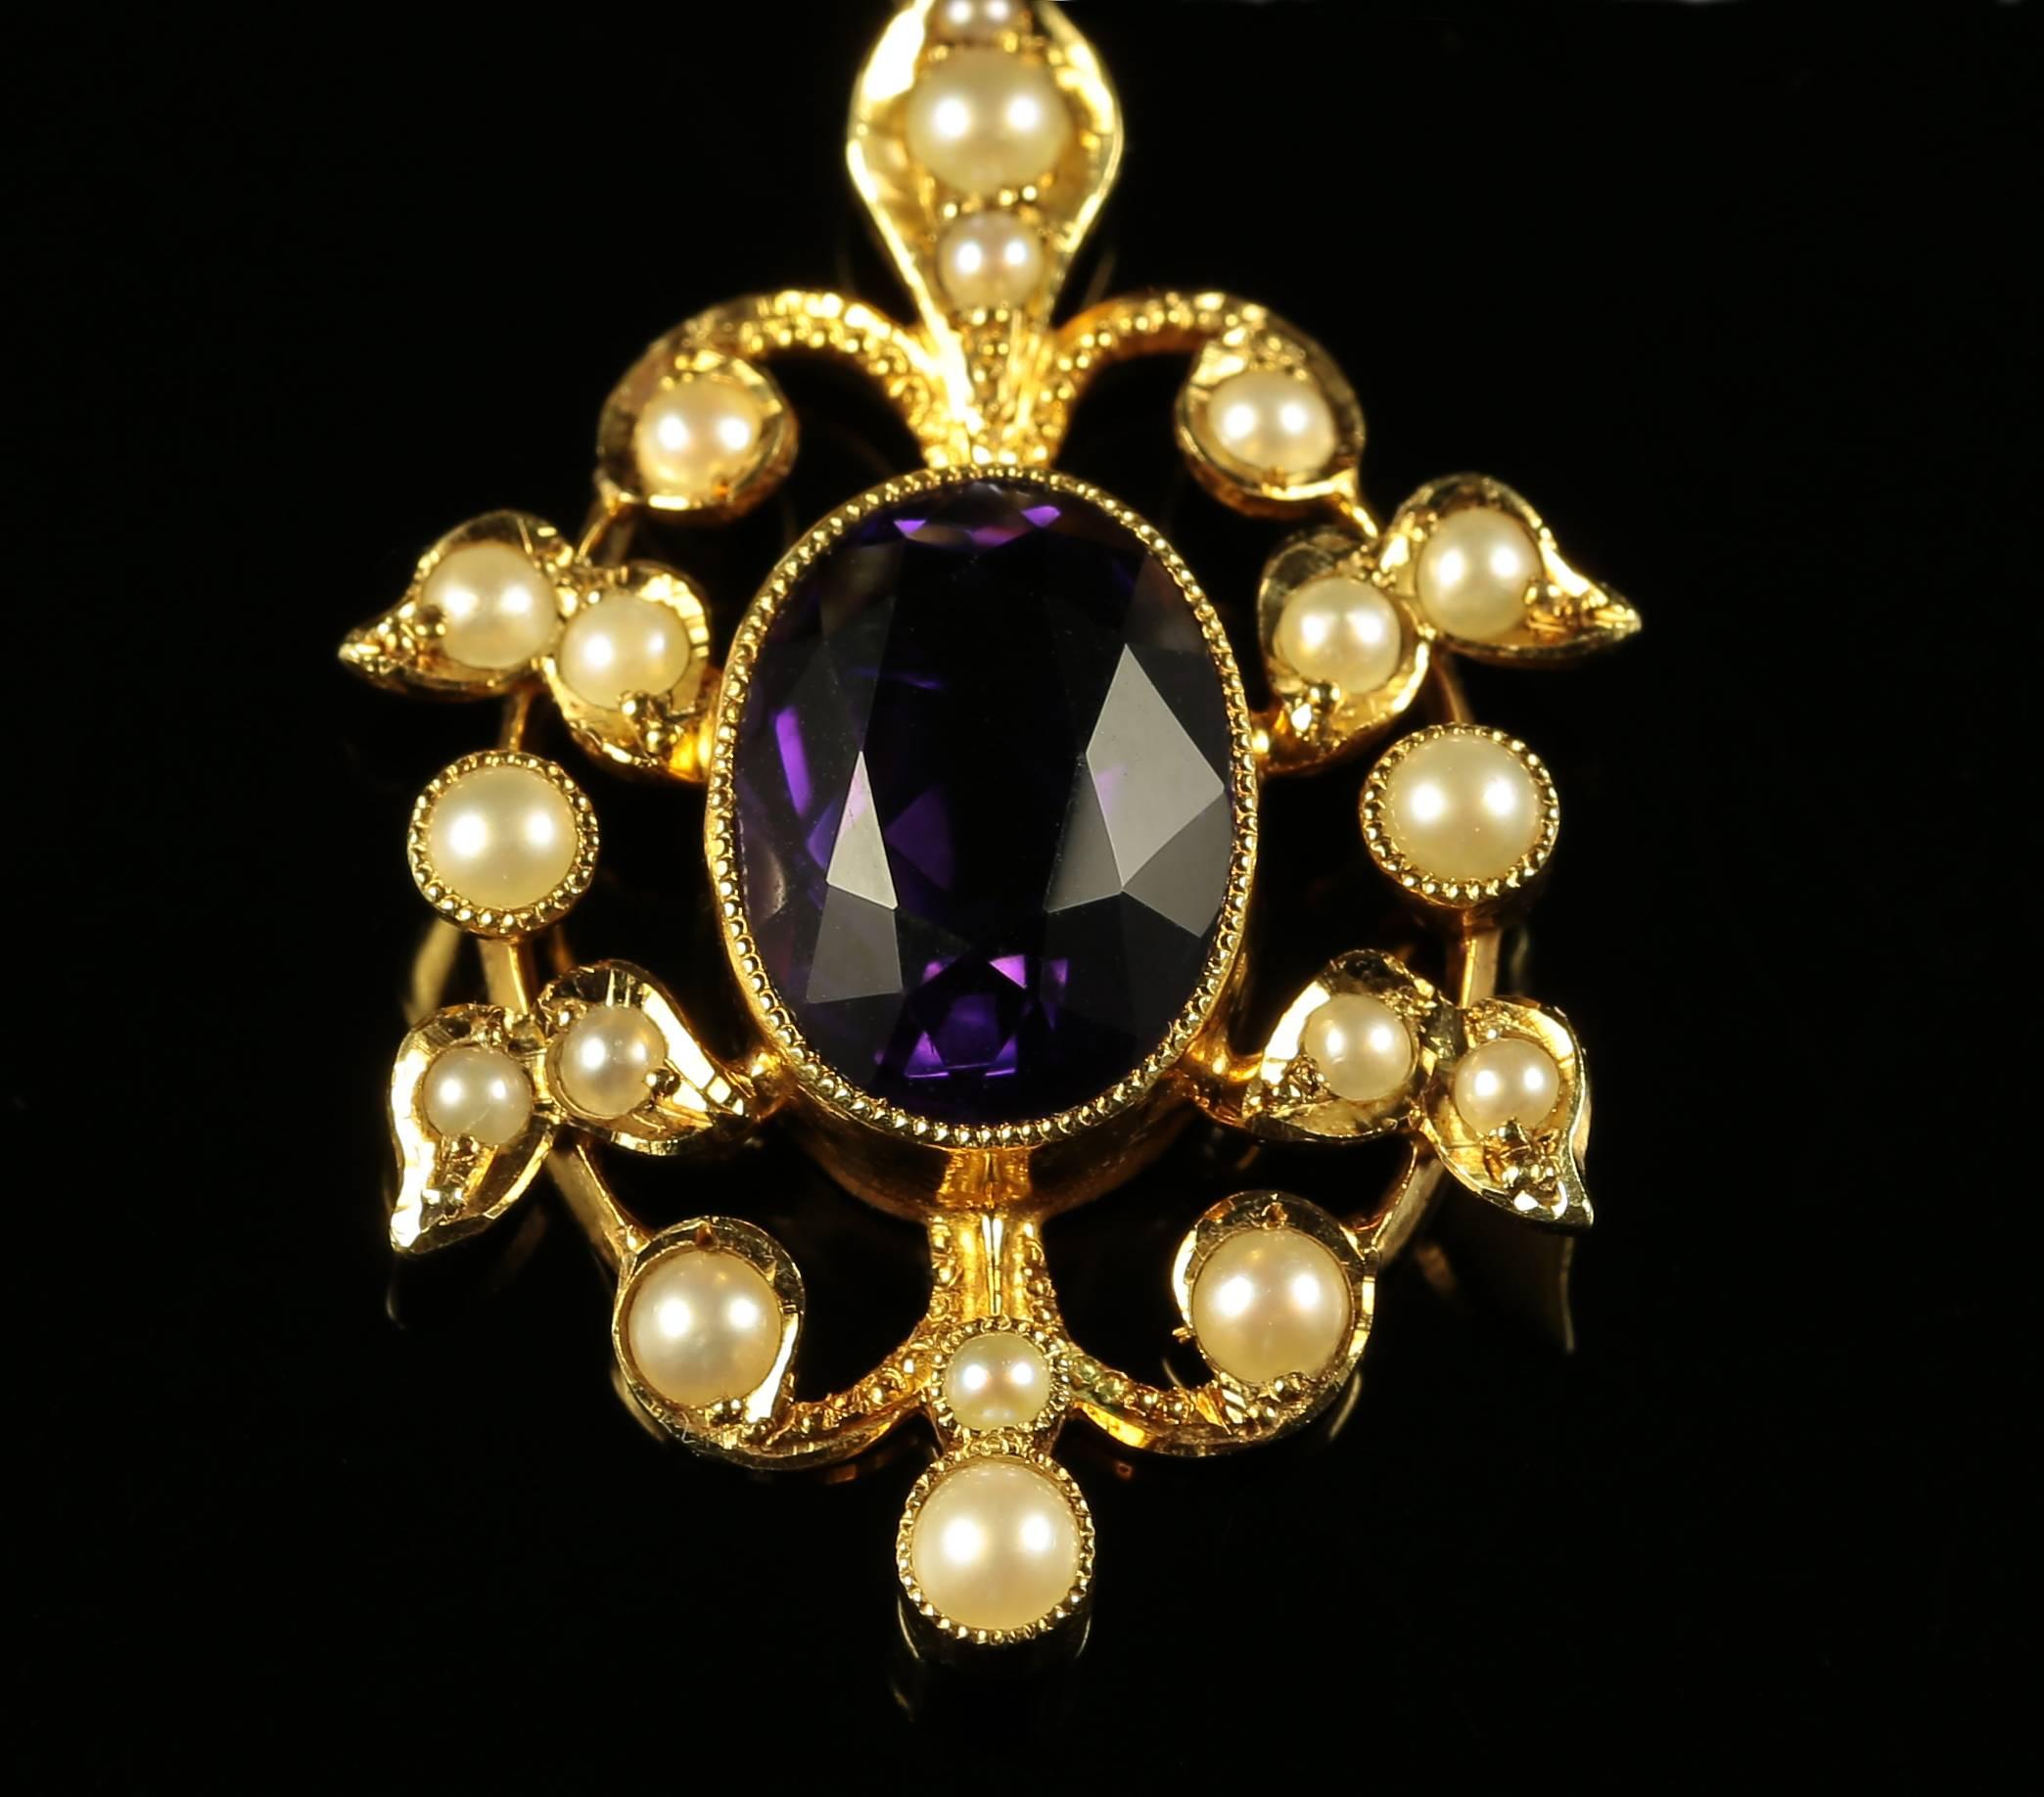 Antique Victorian Amethyst Pearl Necklace 15 Carat Gold Garland Necklace In Excellent Condition For Sale In Lancaster, Lancashire